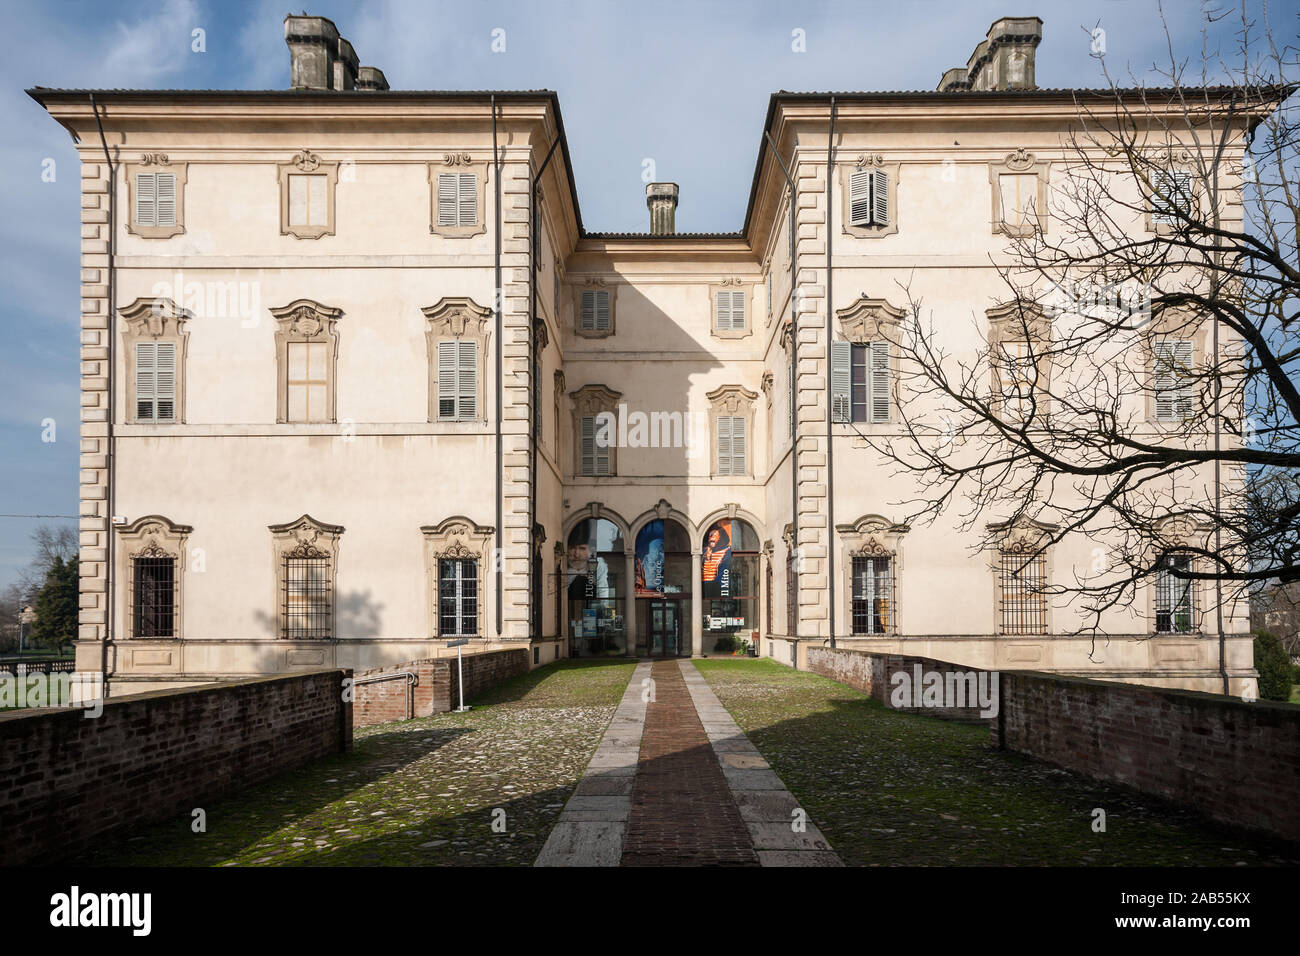 The Museo Giuseppe Verdi musical museum in Busseto, Parma, Emilia Romagna, Italy, dedicated to the famous Italian opera composer born nearby, exterior Stock Photo